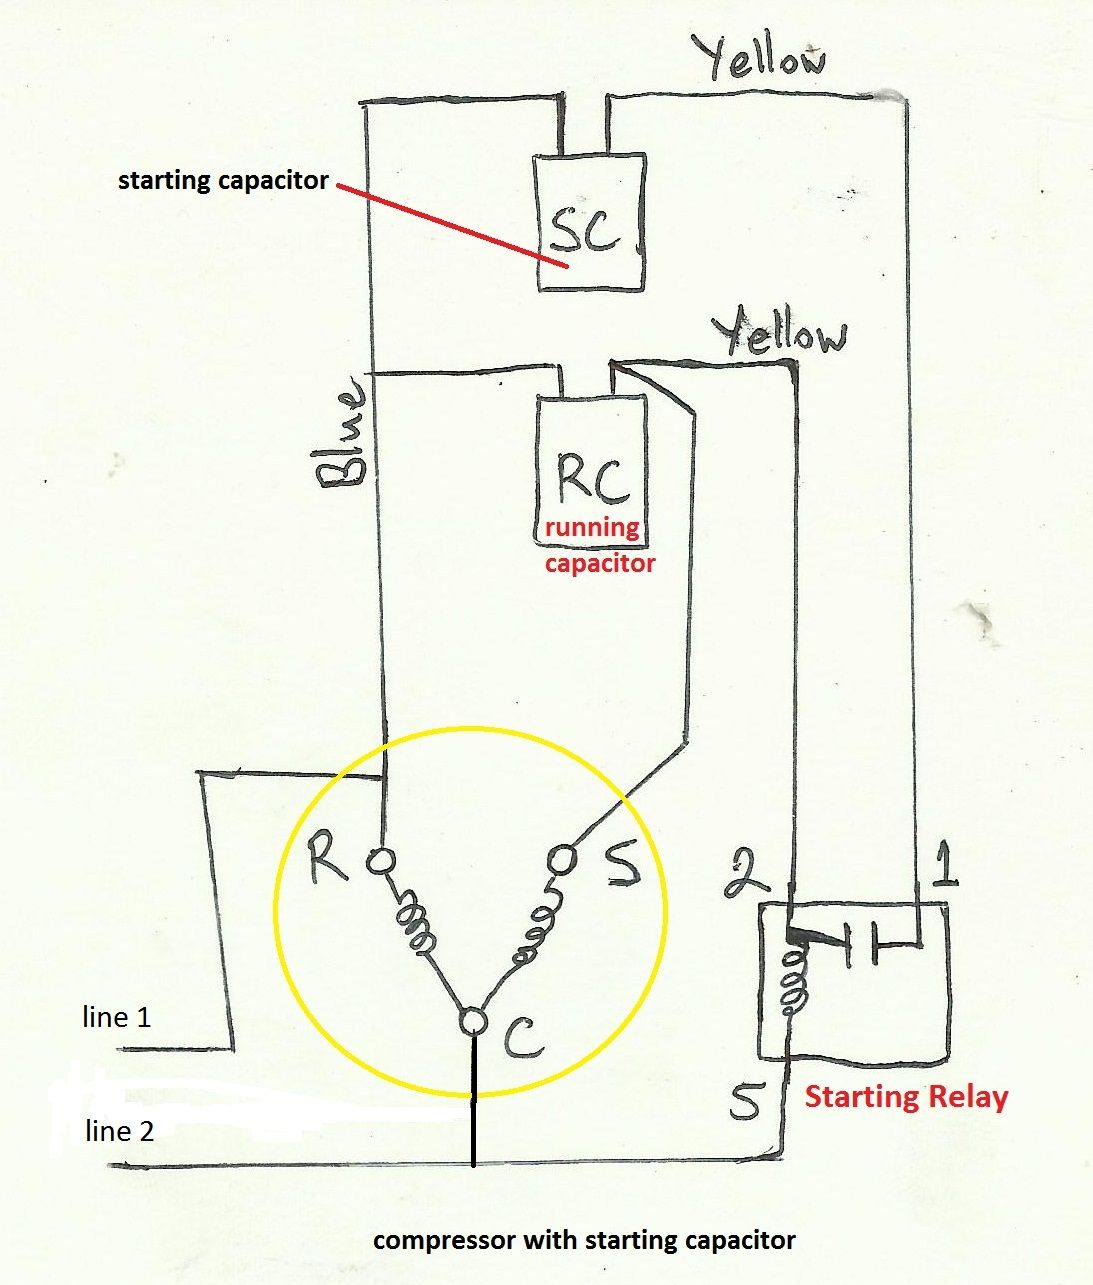 Ac Wiring Diagram - Today Wiring Diagram - Central Air Conditioner Wiring Diagram